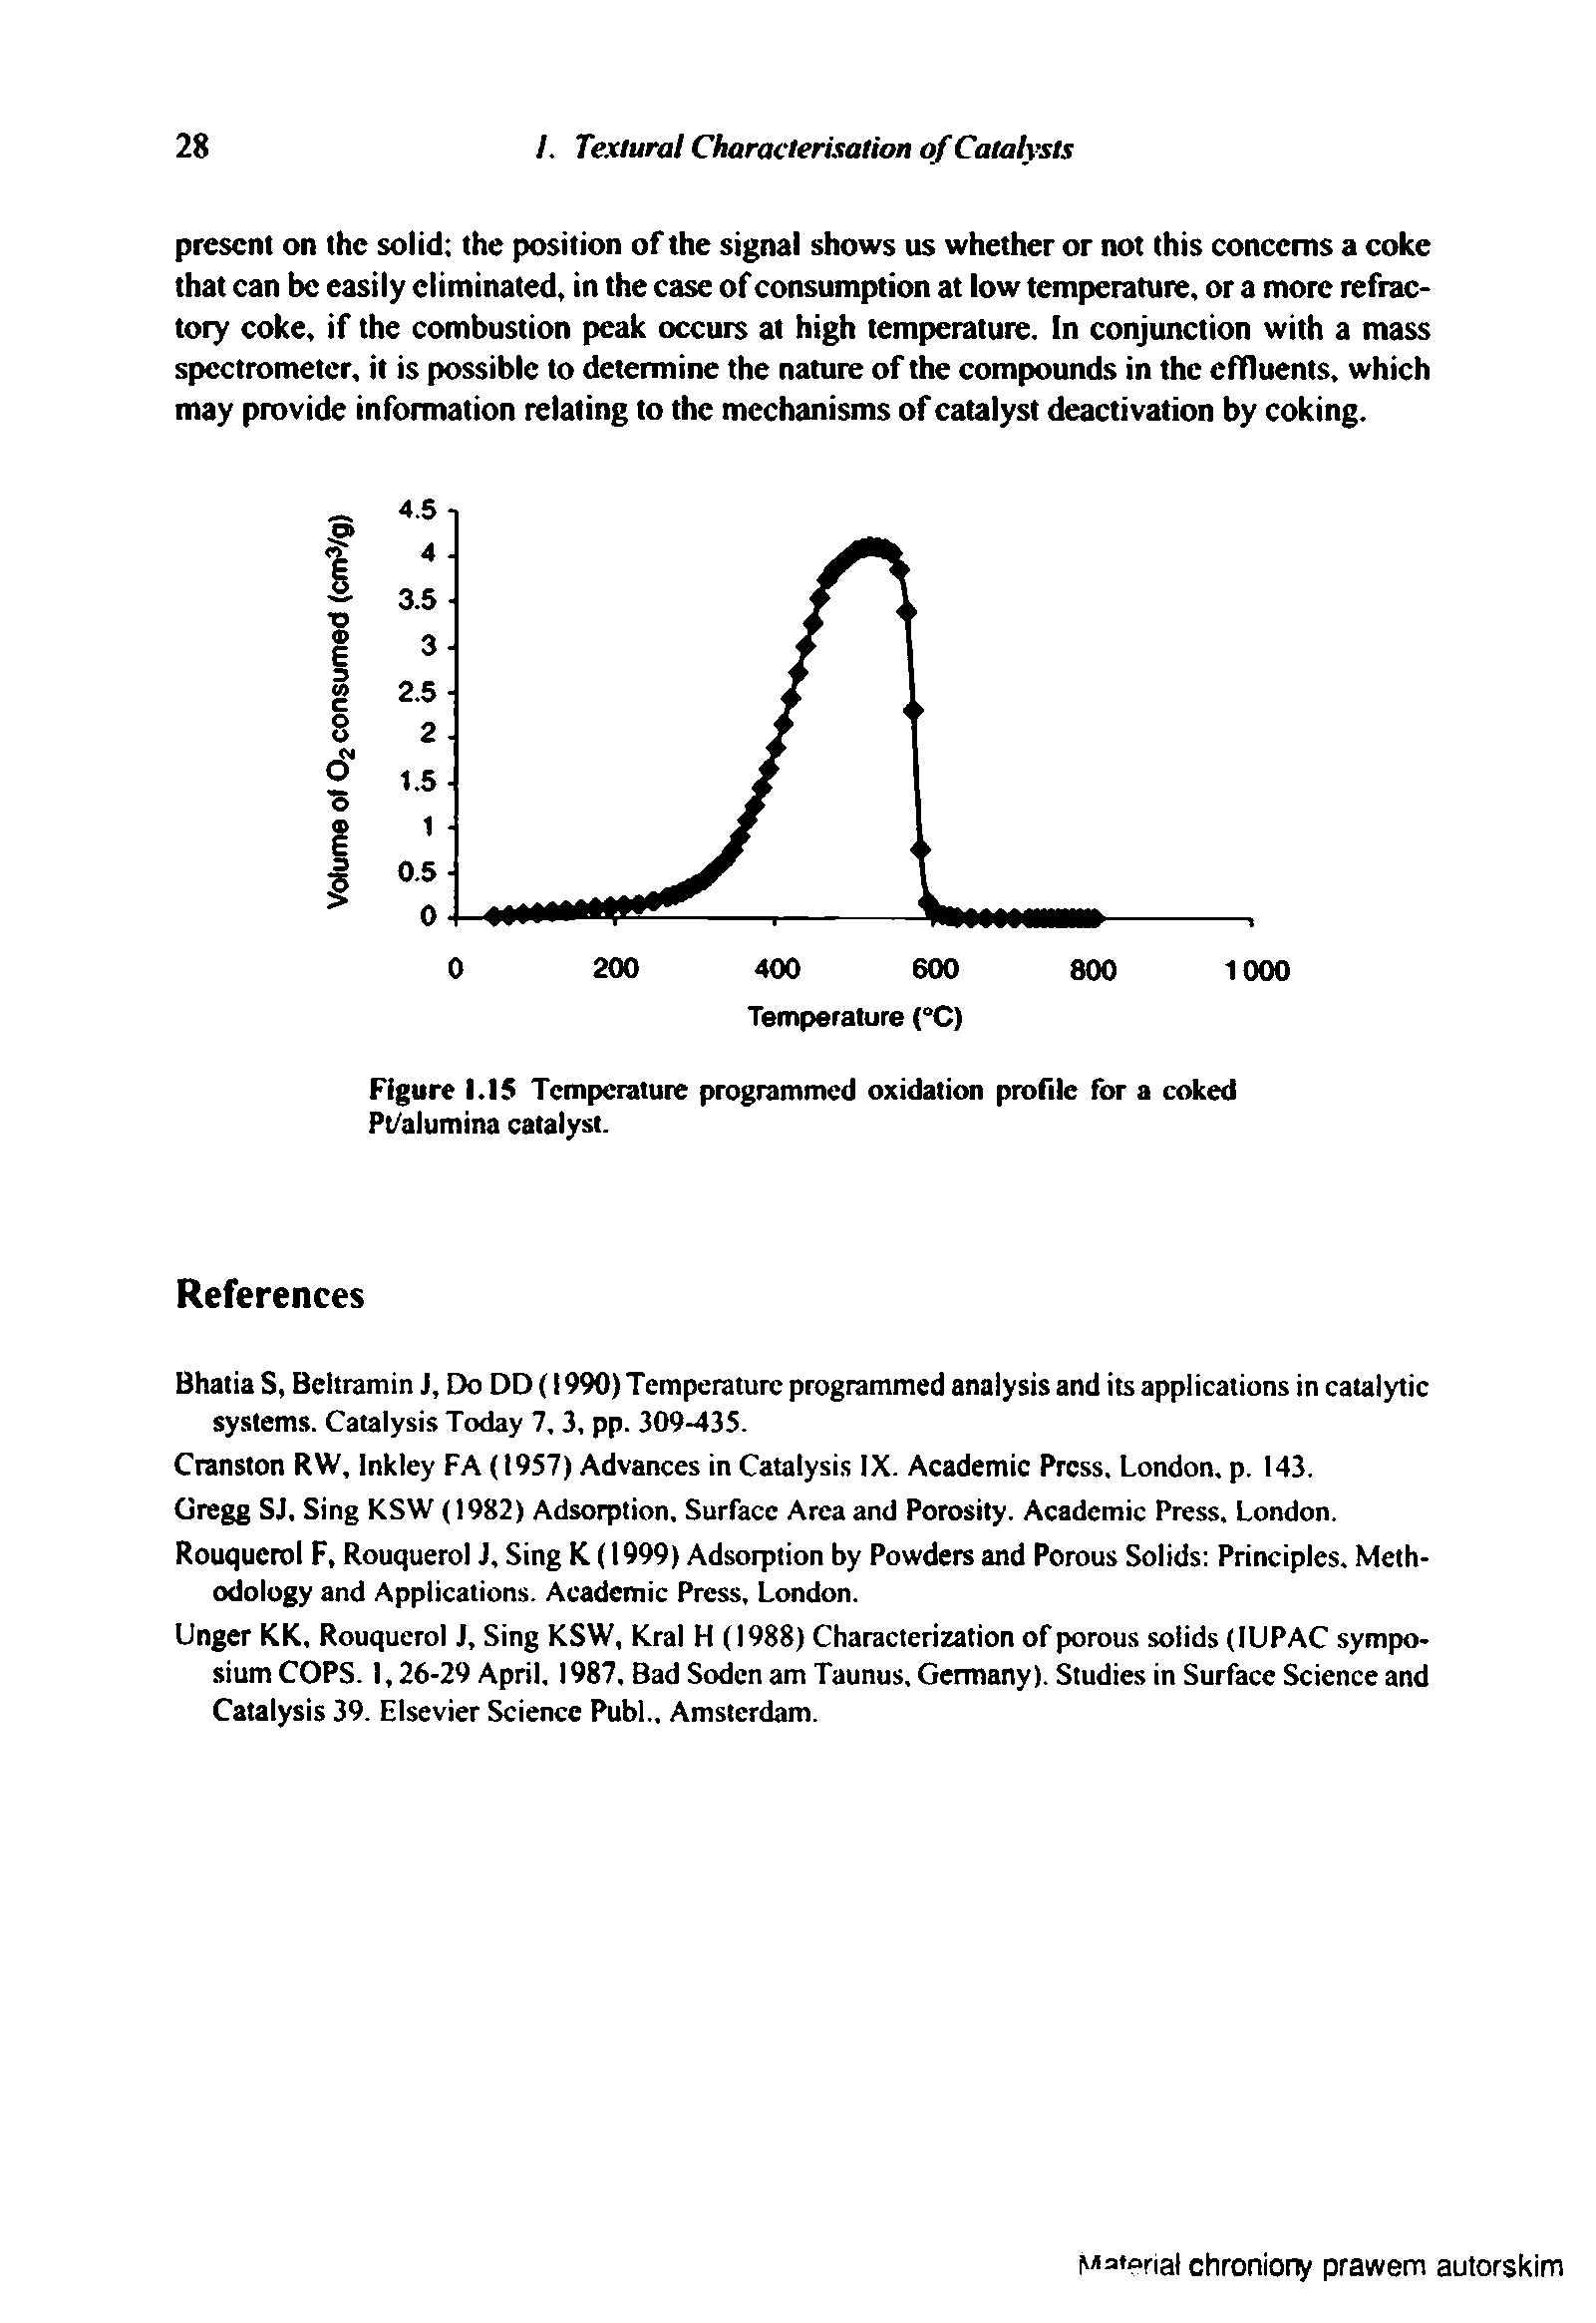 Figure M5 Temperature programmed oxidation profile for a coked Pt/alumina catalyst.